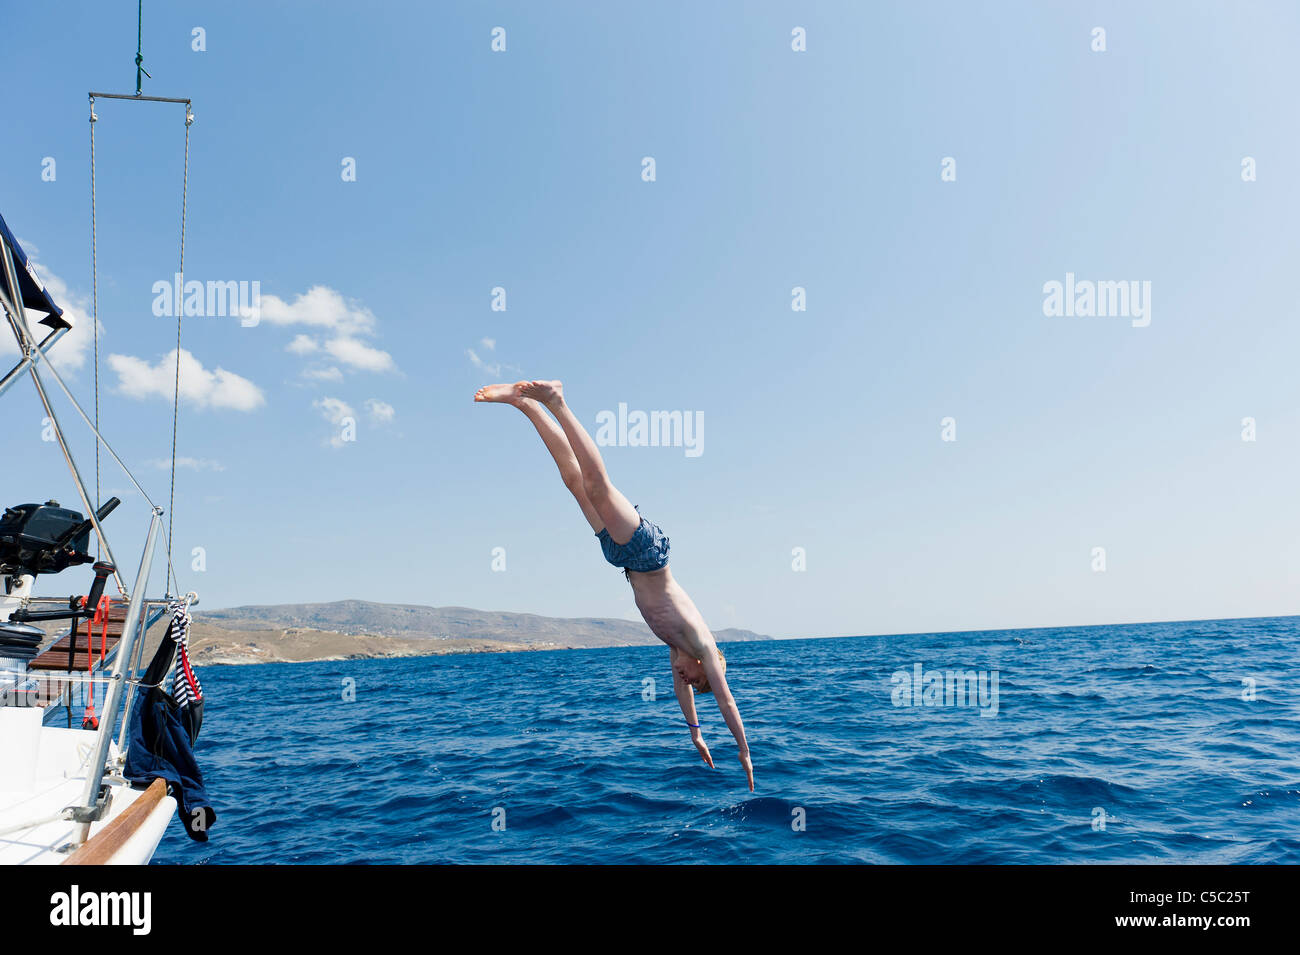 Shirtless teenage boy dives from a sailboat into the water against clear sky Stock Photo